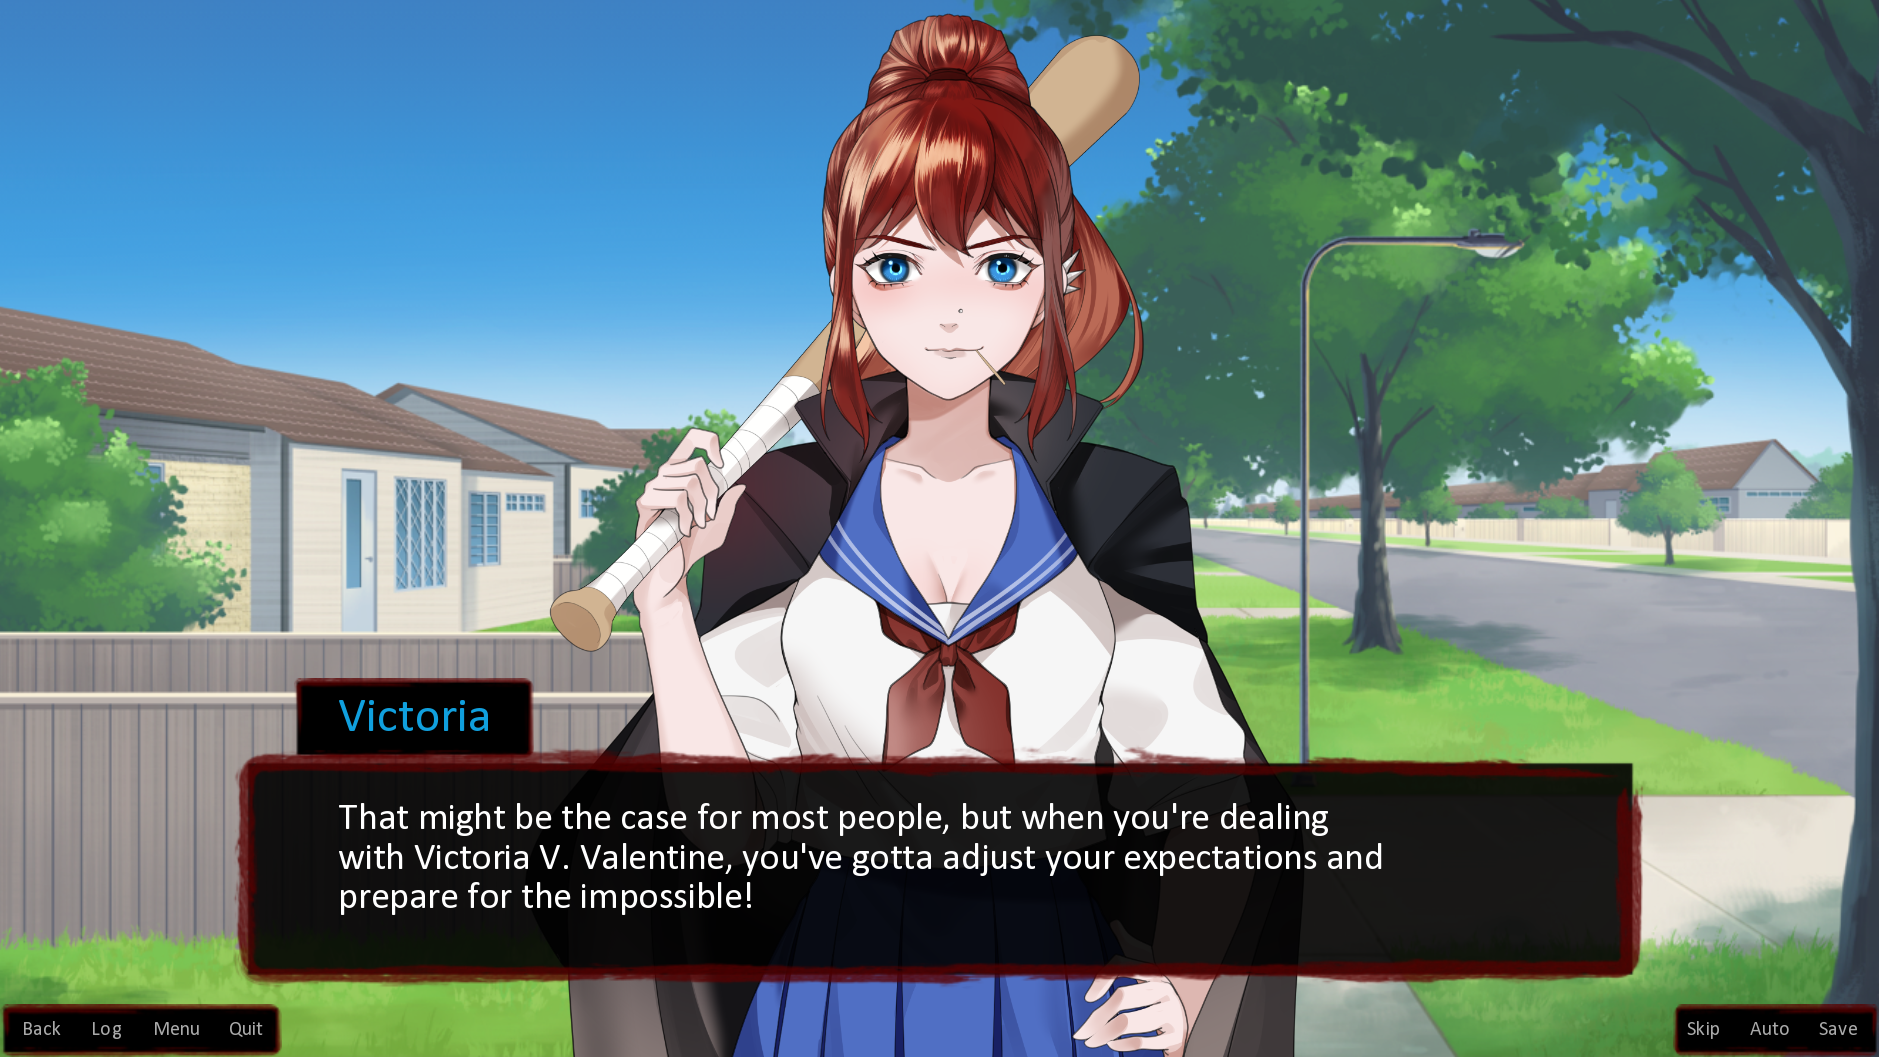 A screenshot from the visual novel The Many Deaths of Lily Kosen. The character Victoria is talking to the protagonist and smiling.